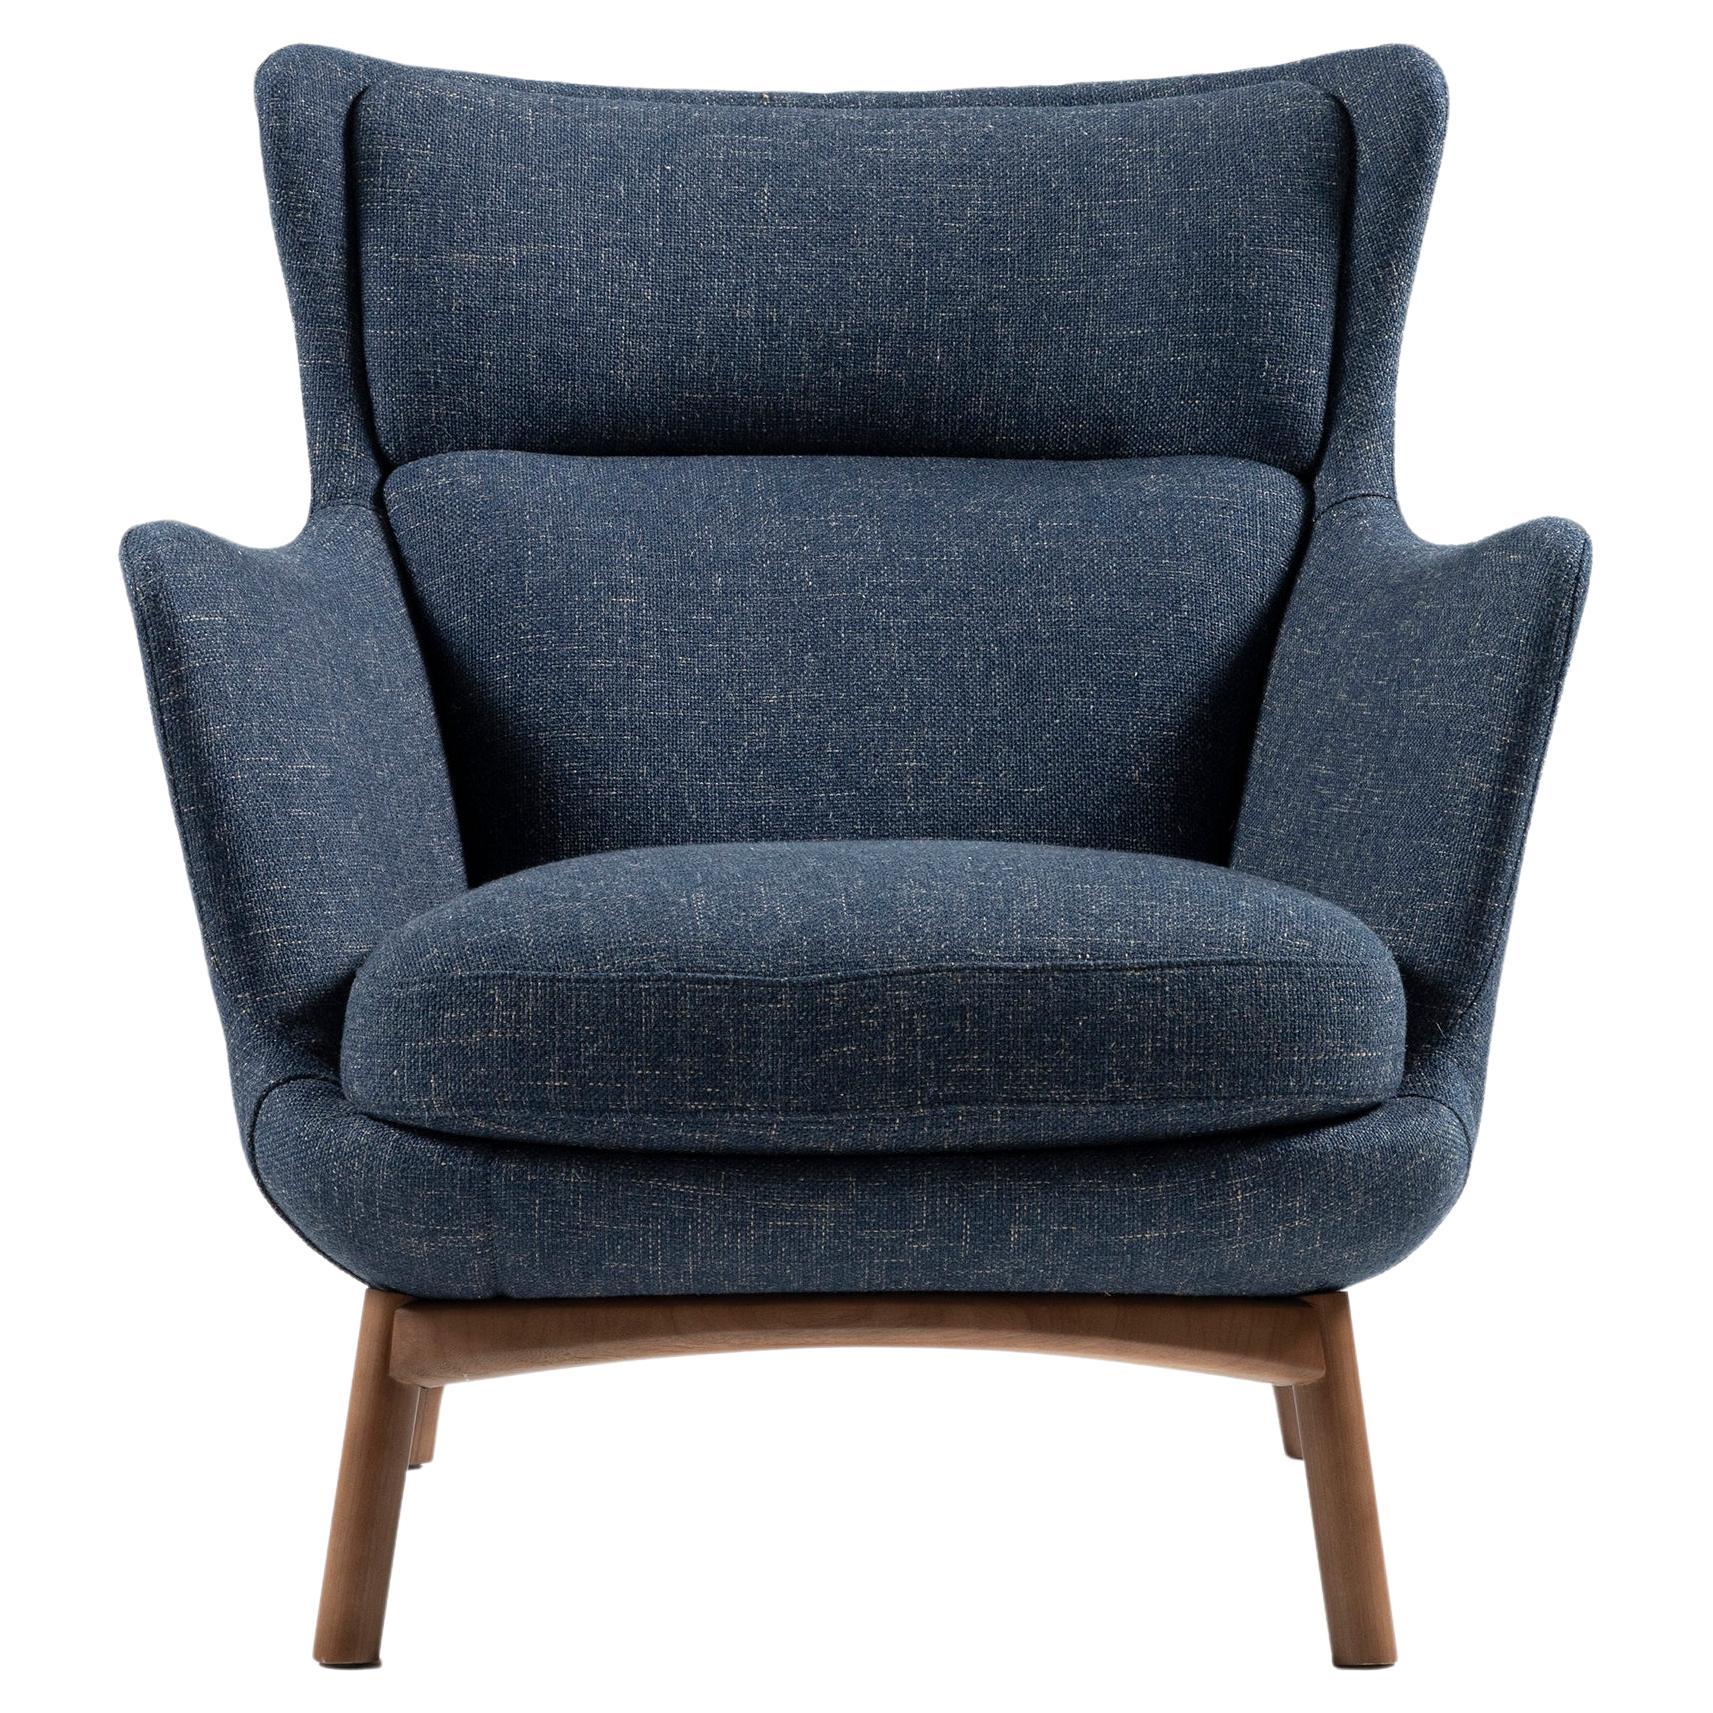 Sublime Armchairs, Contemporary Style in Solid Wood, Textiles Upholstery. 